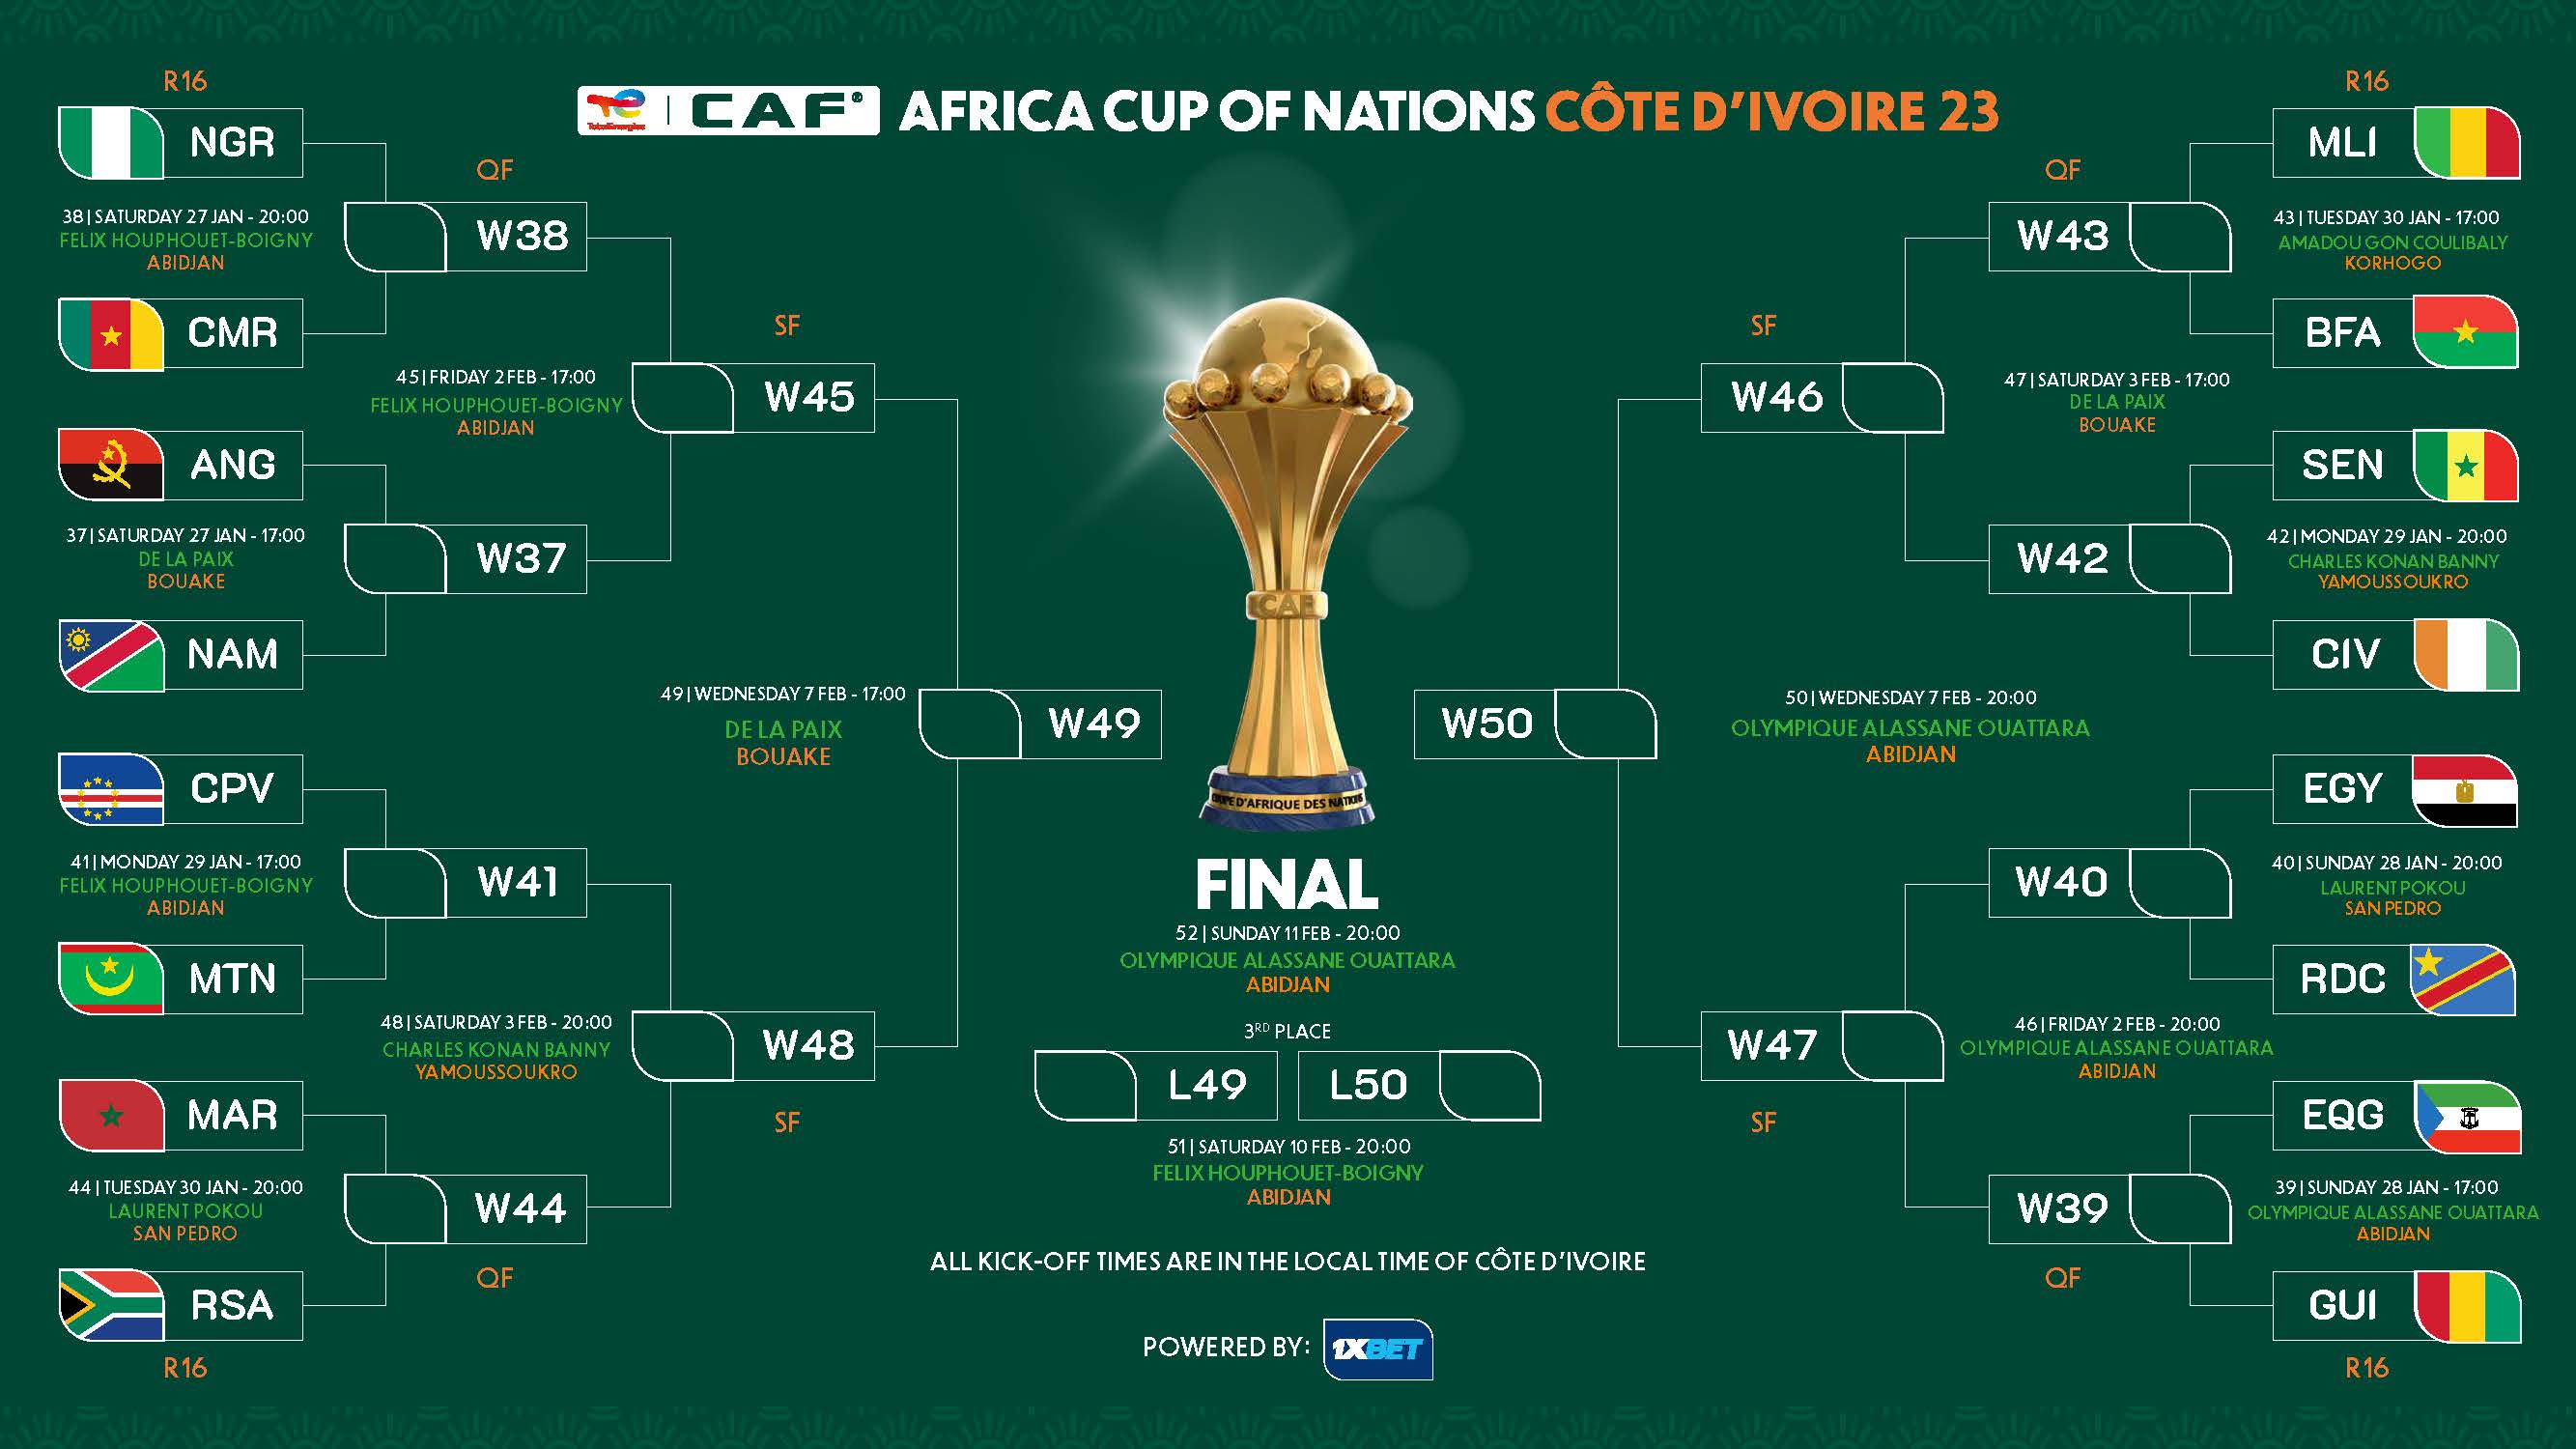 TotalEnergies CAF Africa Cup of Nations Cote d'Ivoire 2023 Round of 16